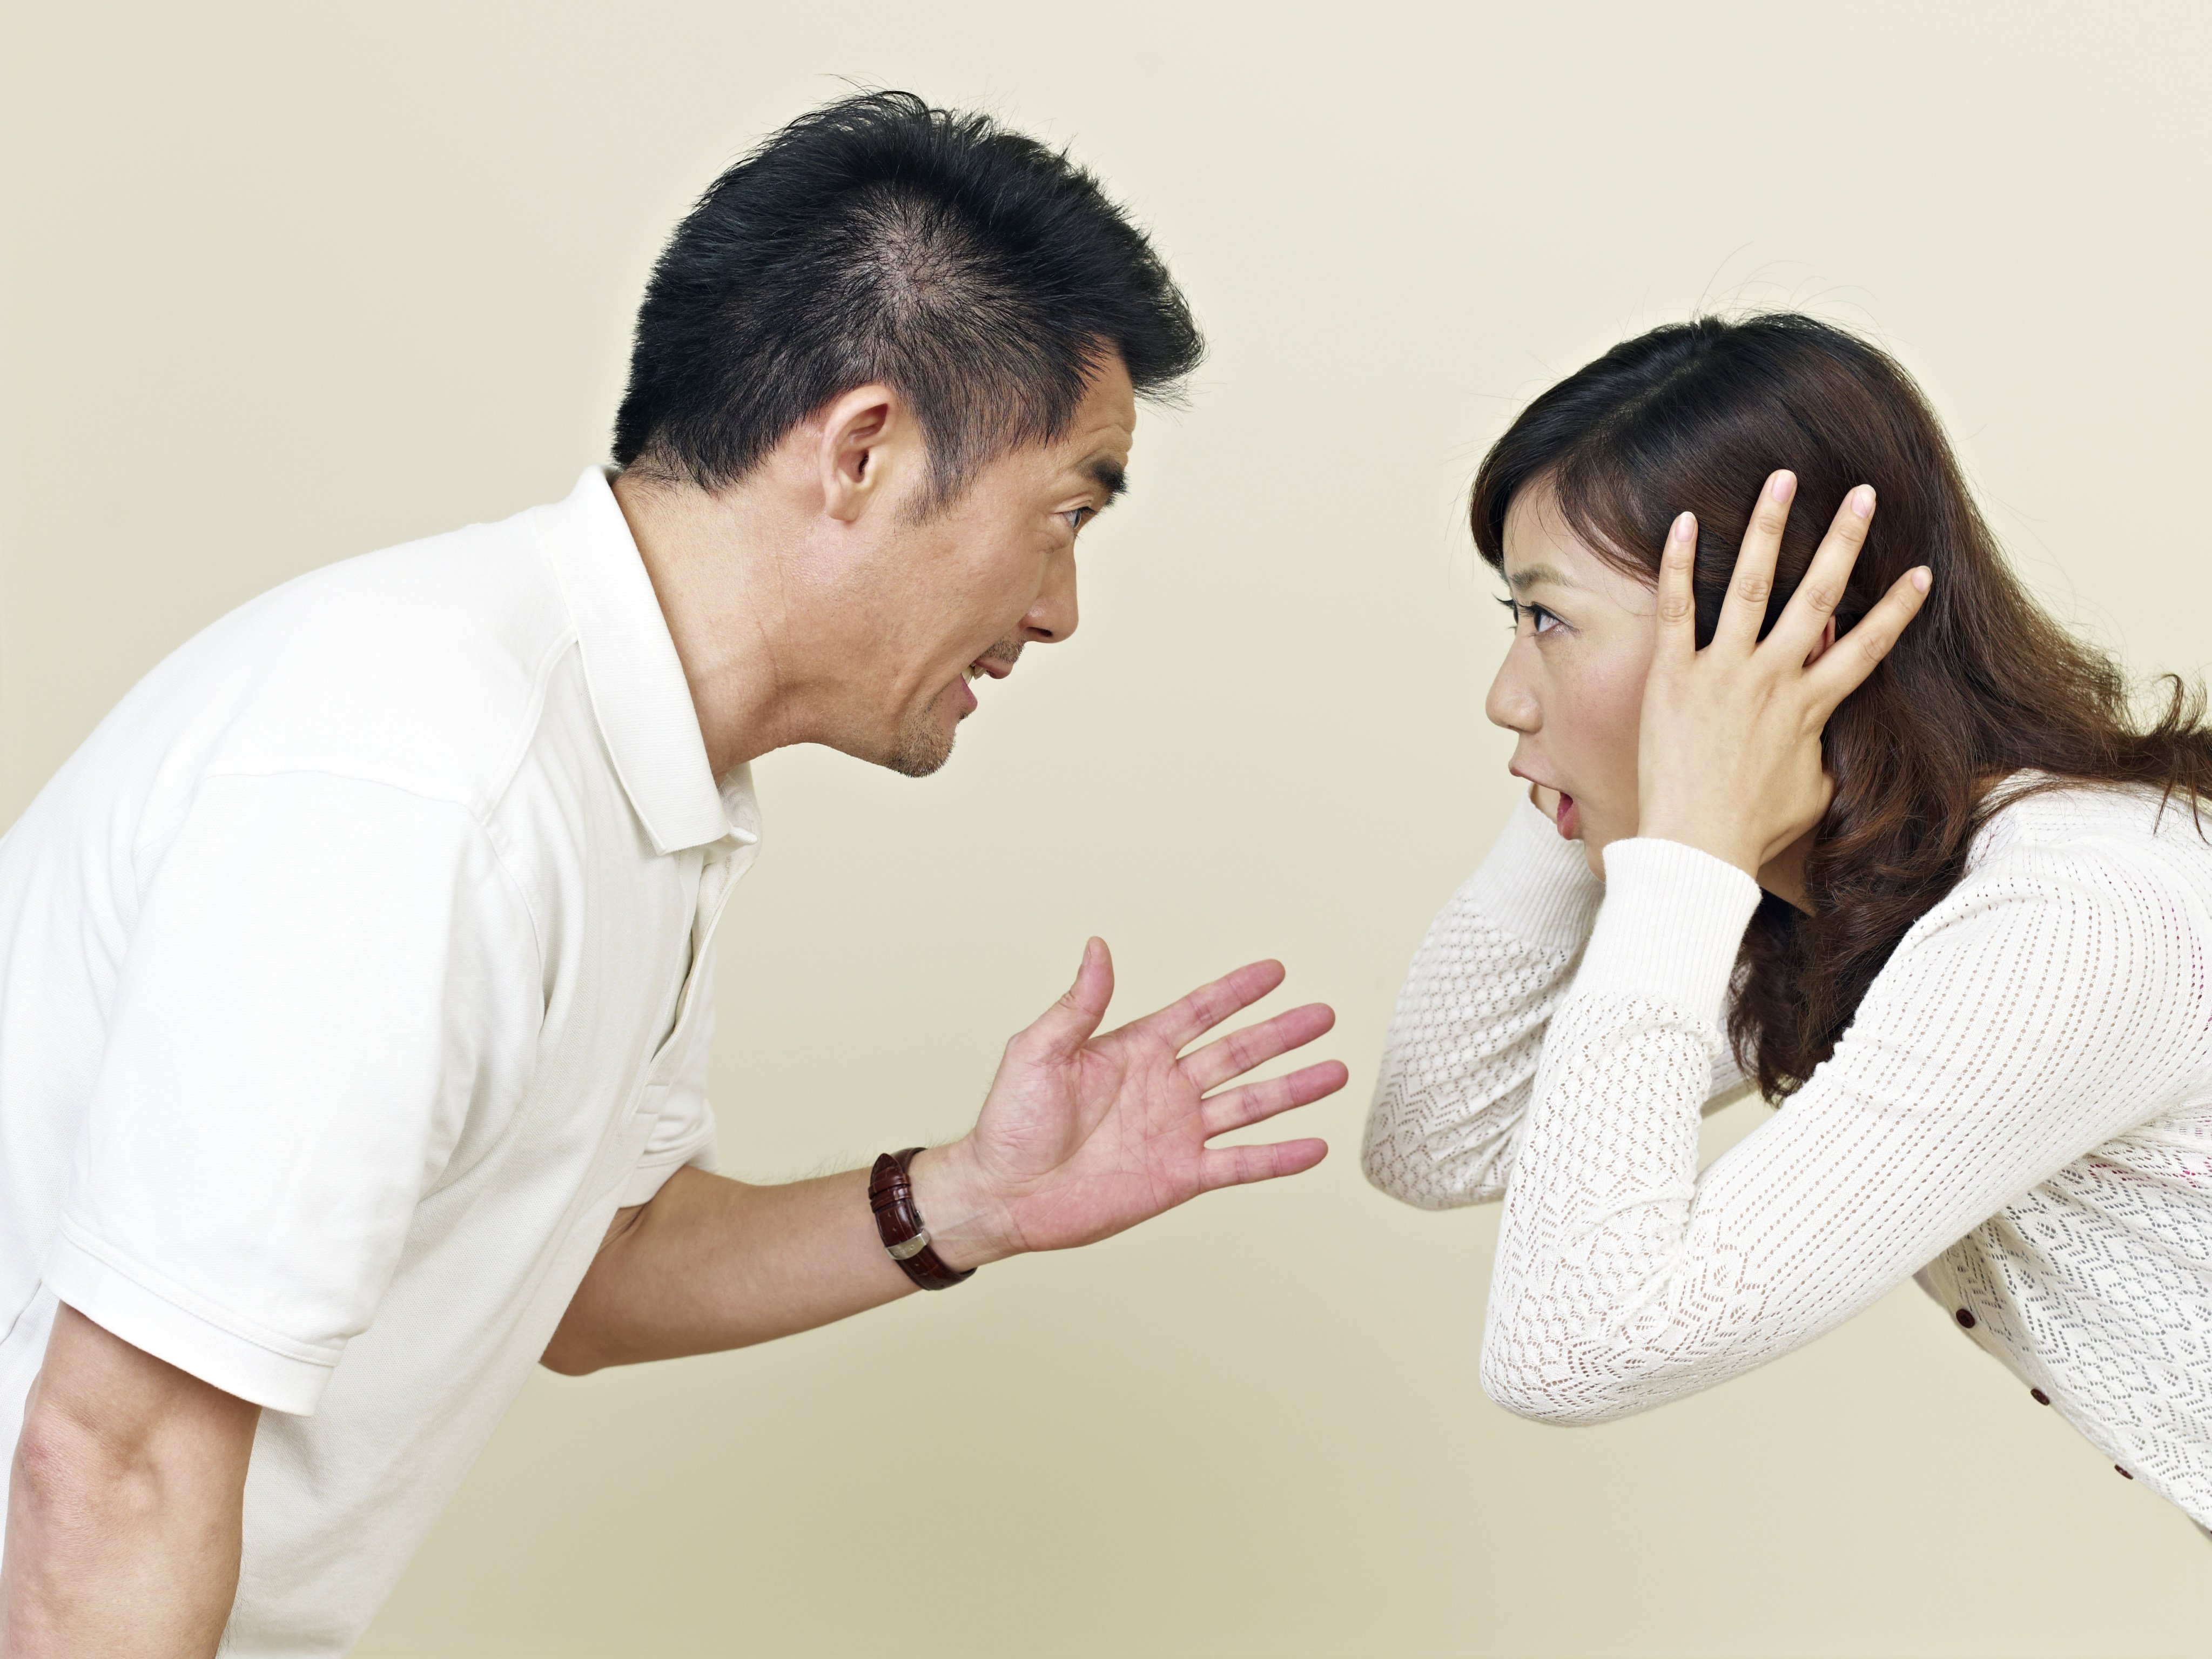 Reports of rude behaviour are becoming increasingly commonplace in Japan – a society that has long prided itself on politeness and respect towards others. Photo: Shutterstock